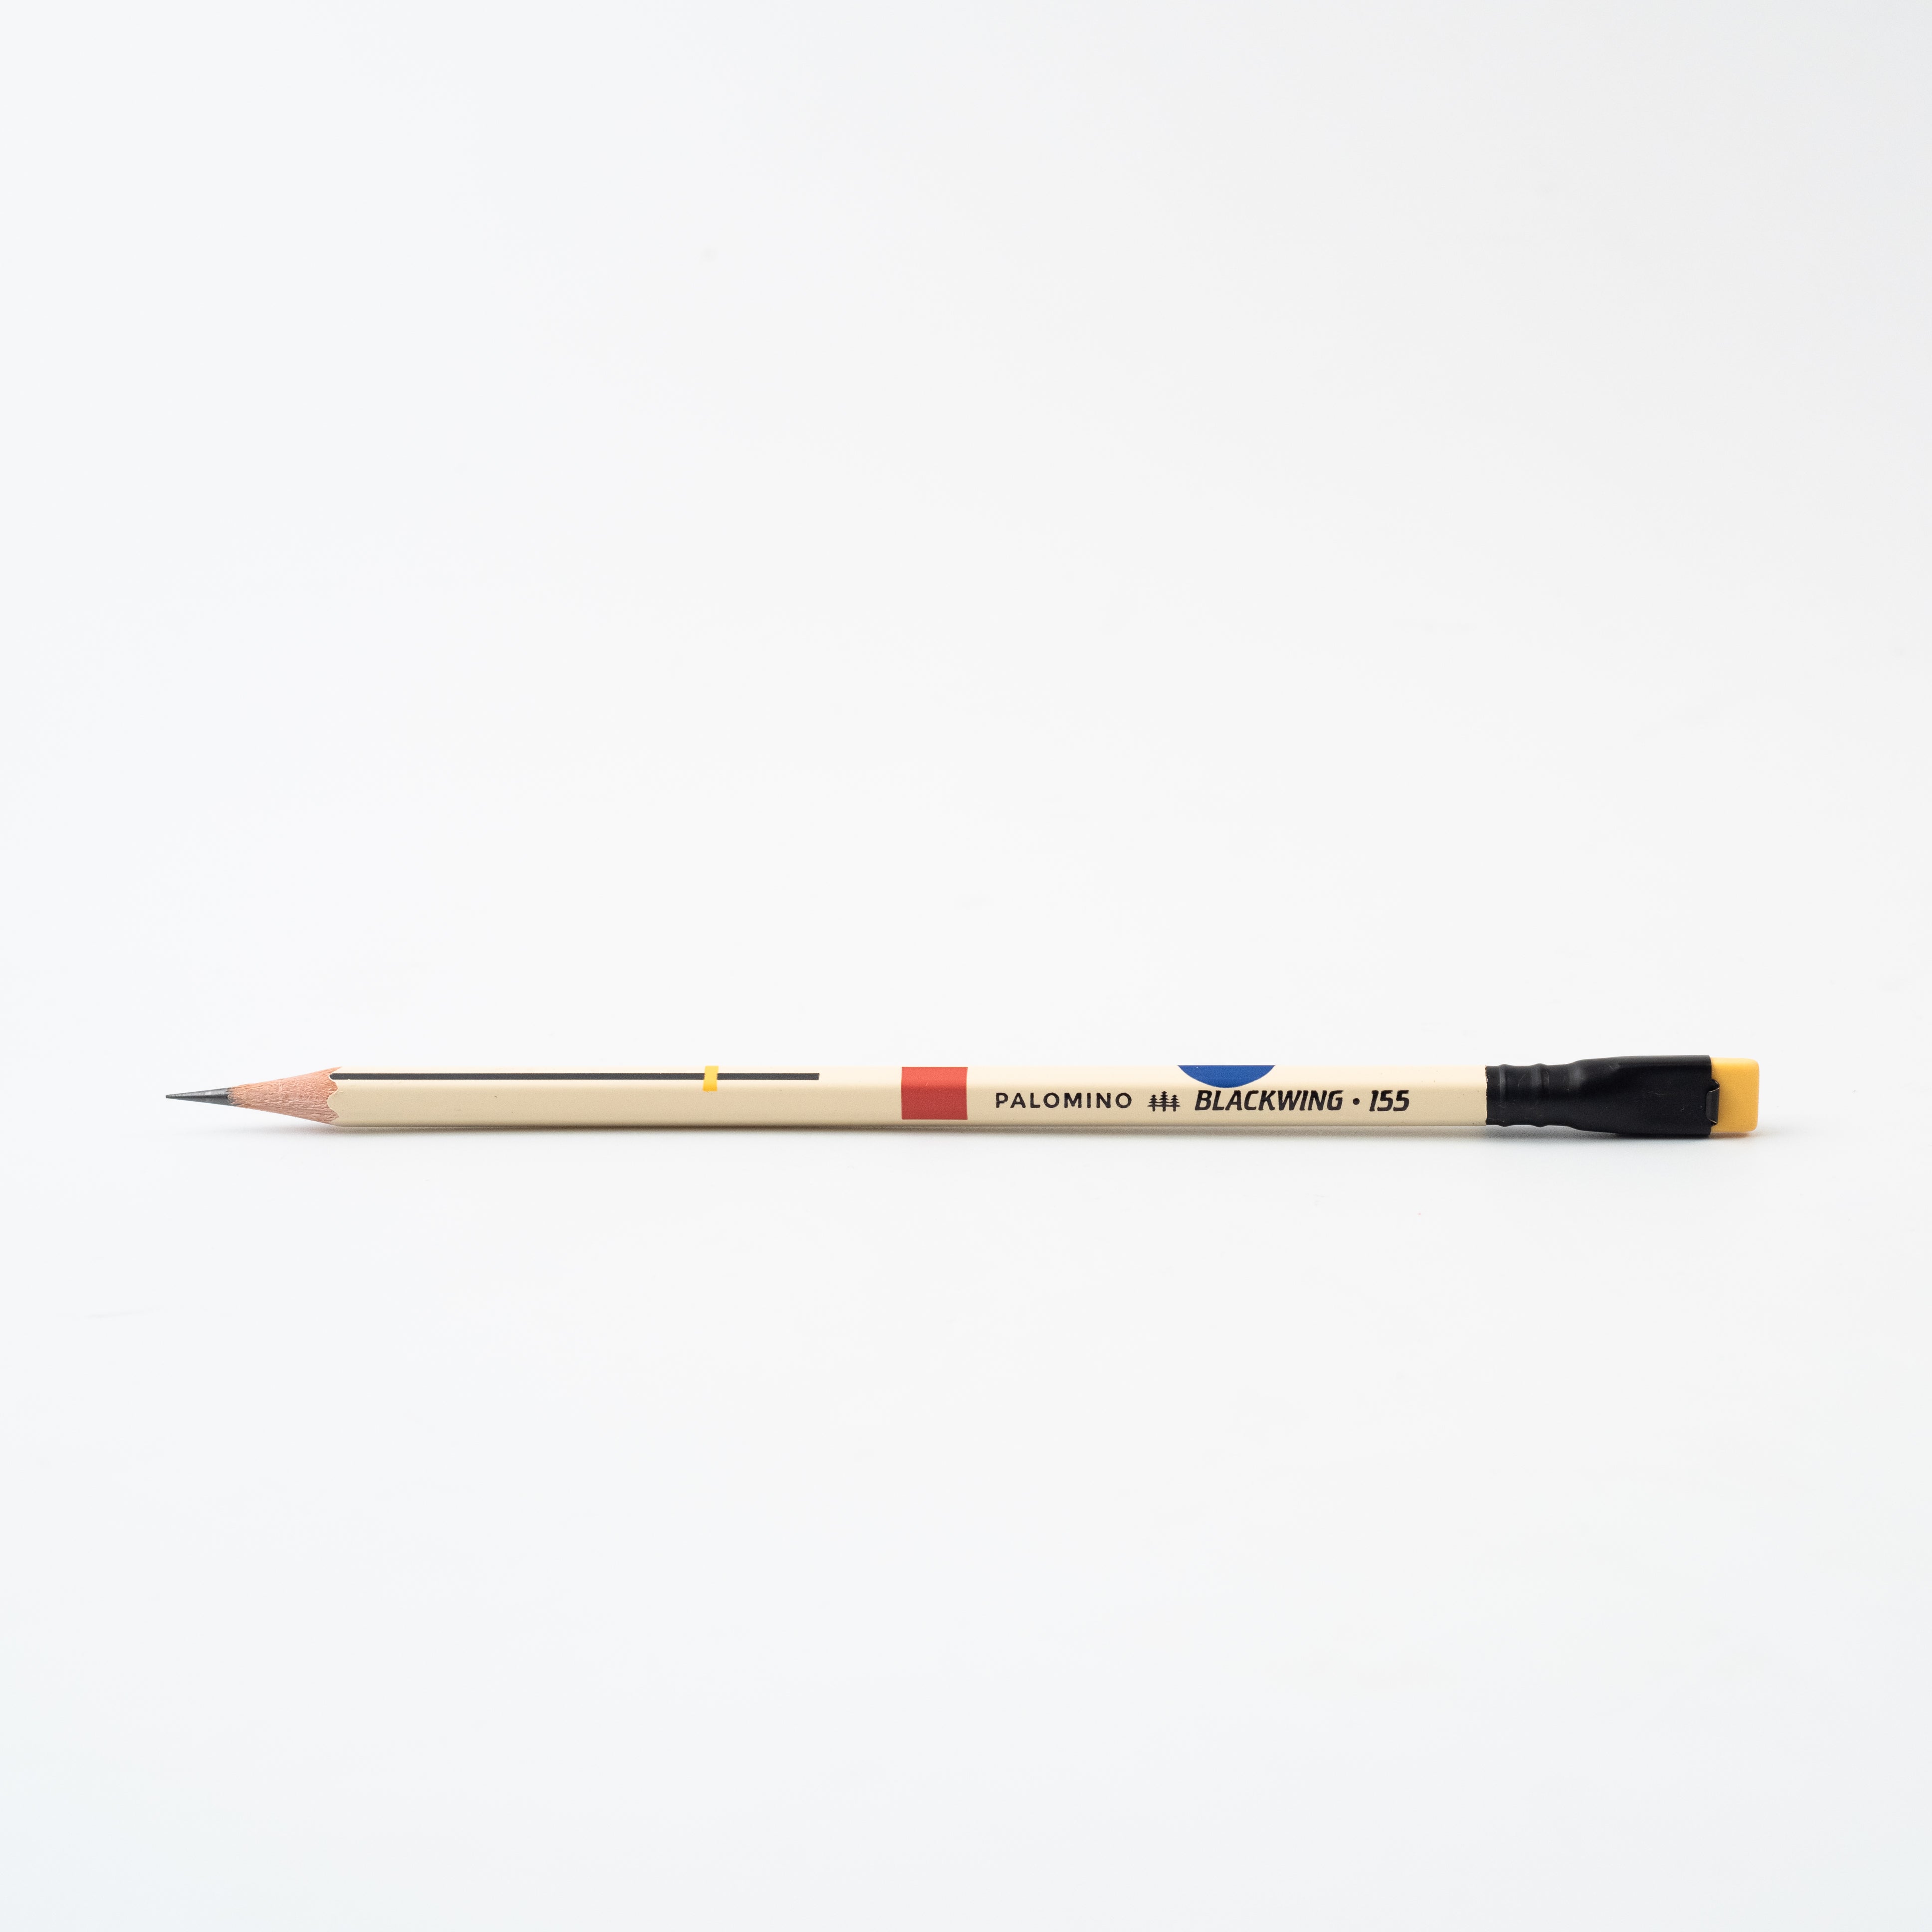 A Blackwing Volume 155 (Set of 12) pencil with an eraser.